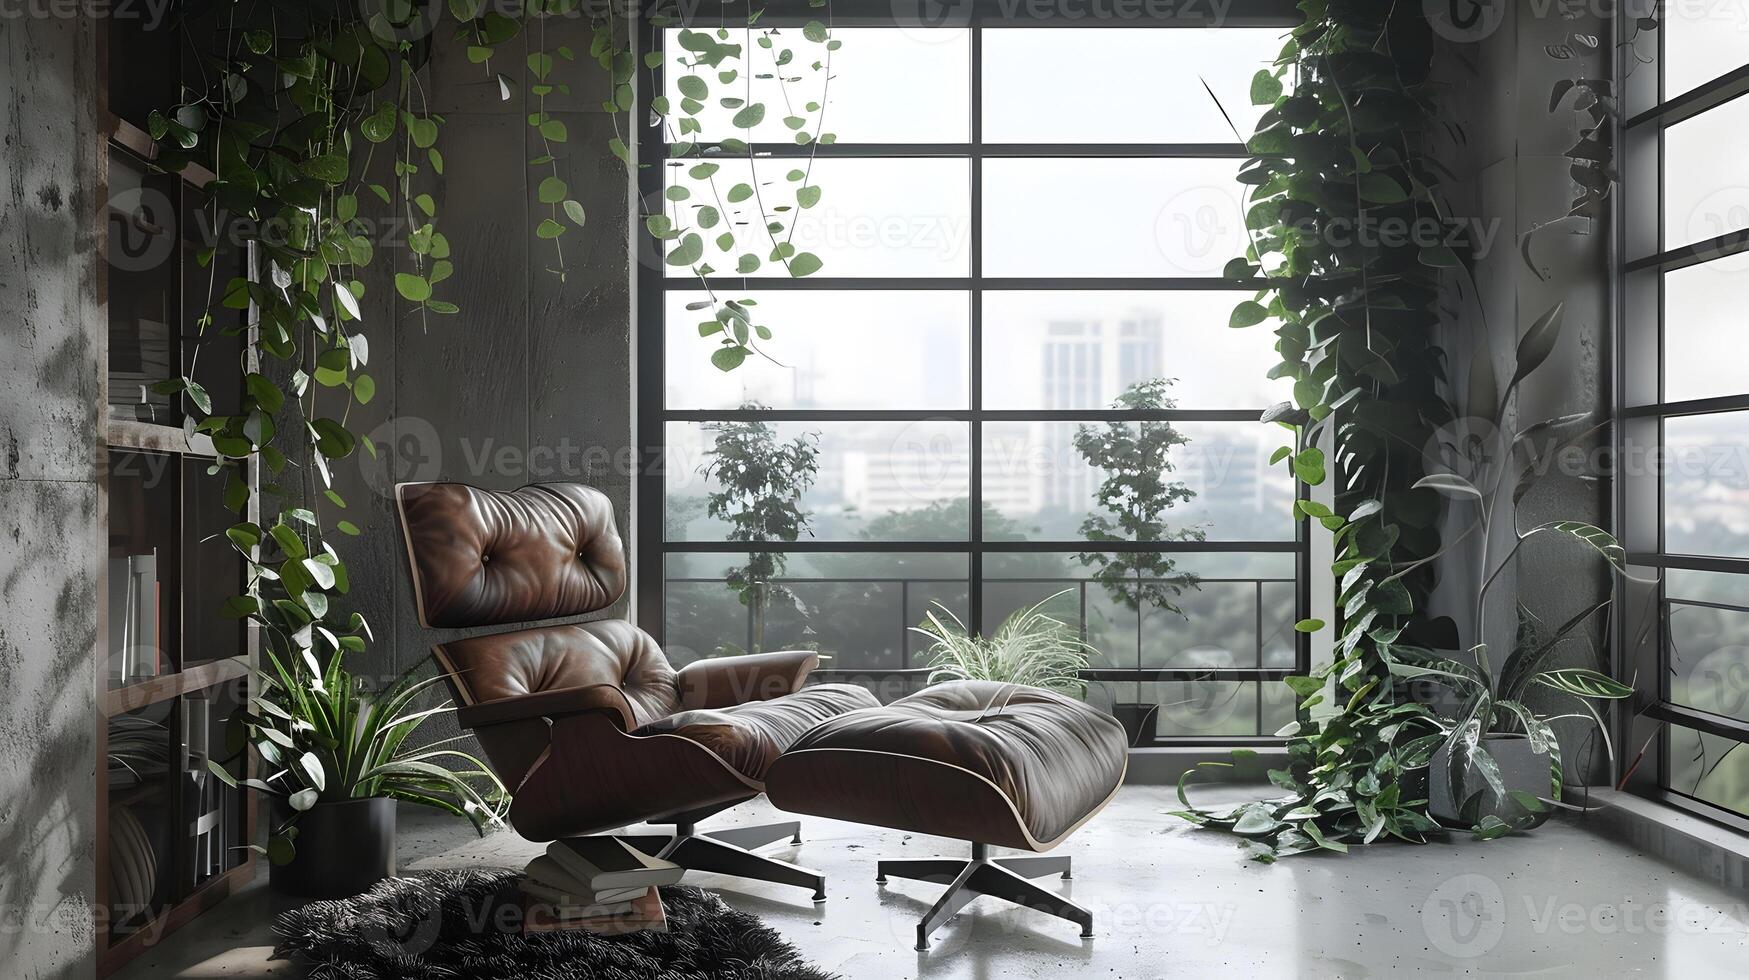 Cozy Industrial Loft Living Room with Verdant Botanical Accents Offering a Serene and Contemplative Atmosphere photo